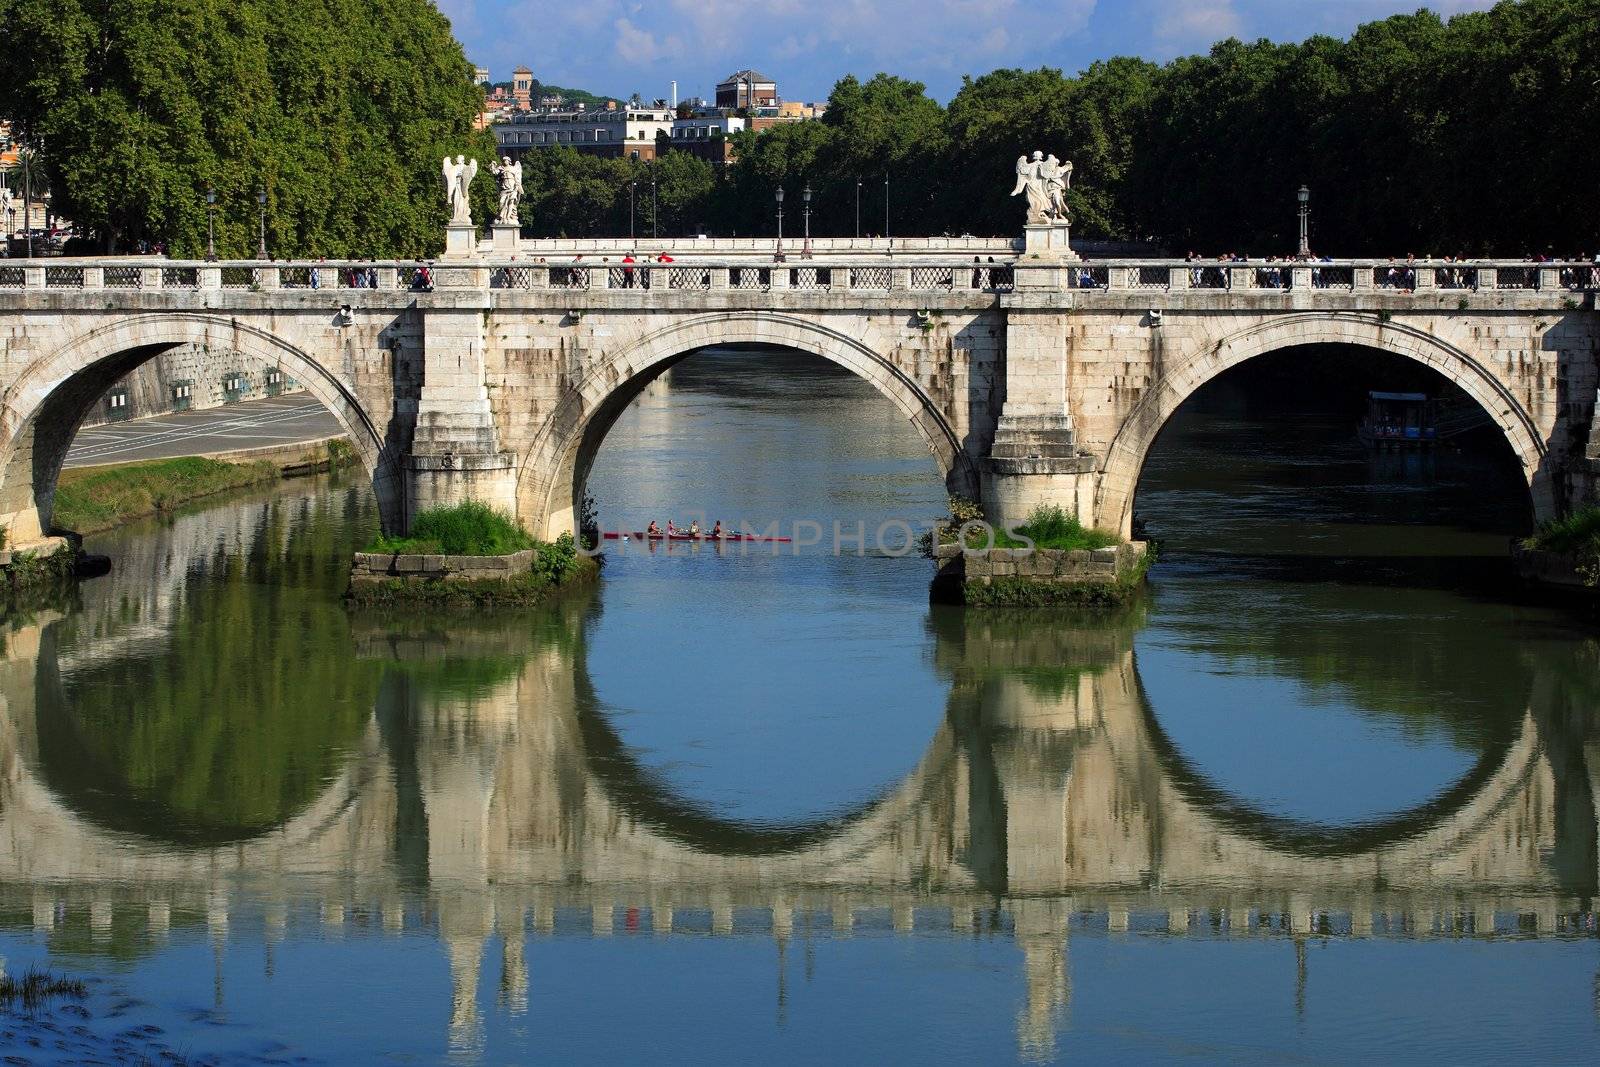 Old bridge in Rome, Italy - with a group of rowers passing underneath.
